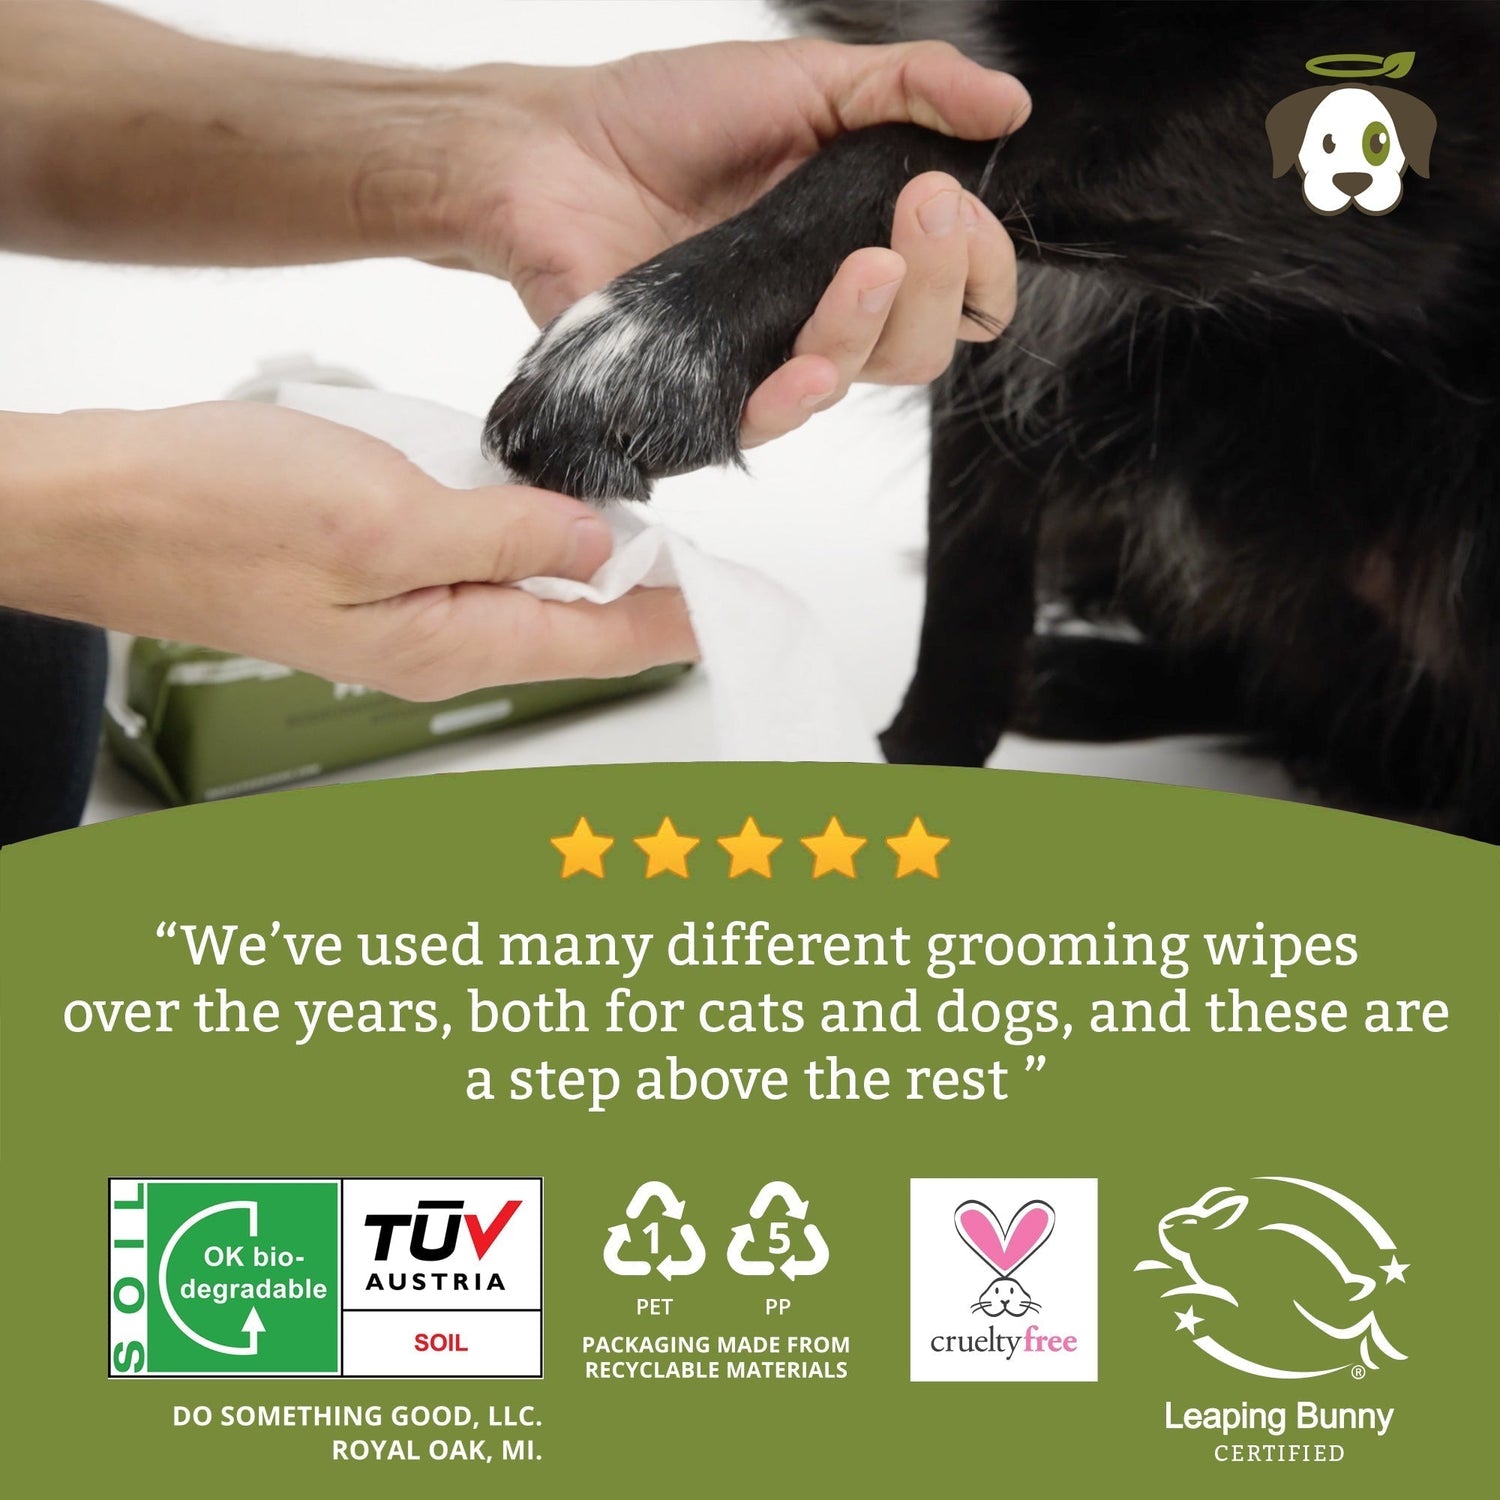 Biodegradable Grooming Wipes - Natural Scent (180 Wipes)